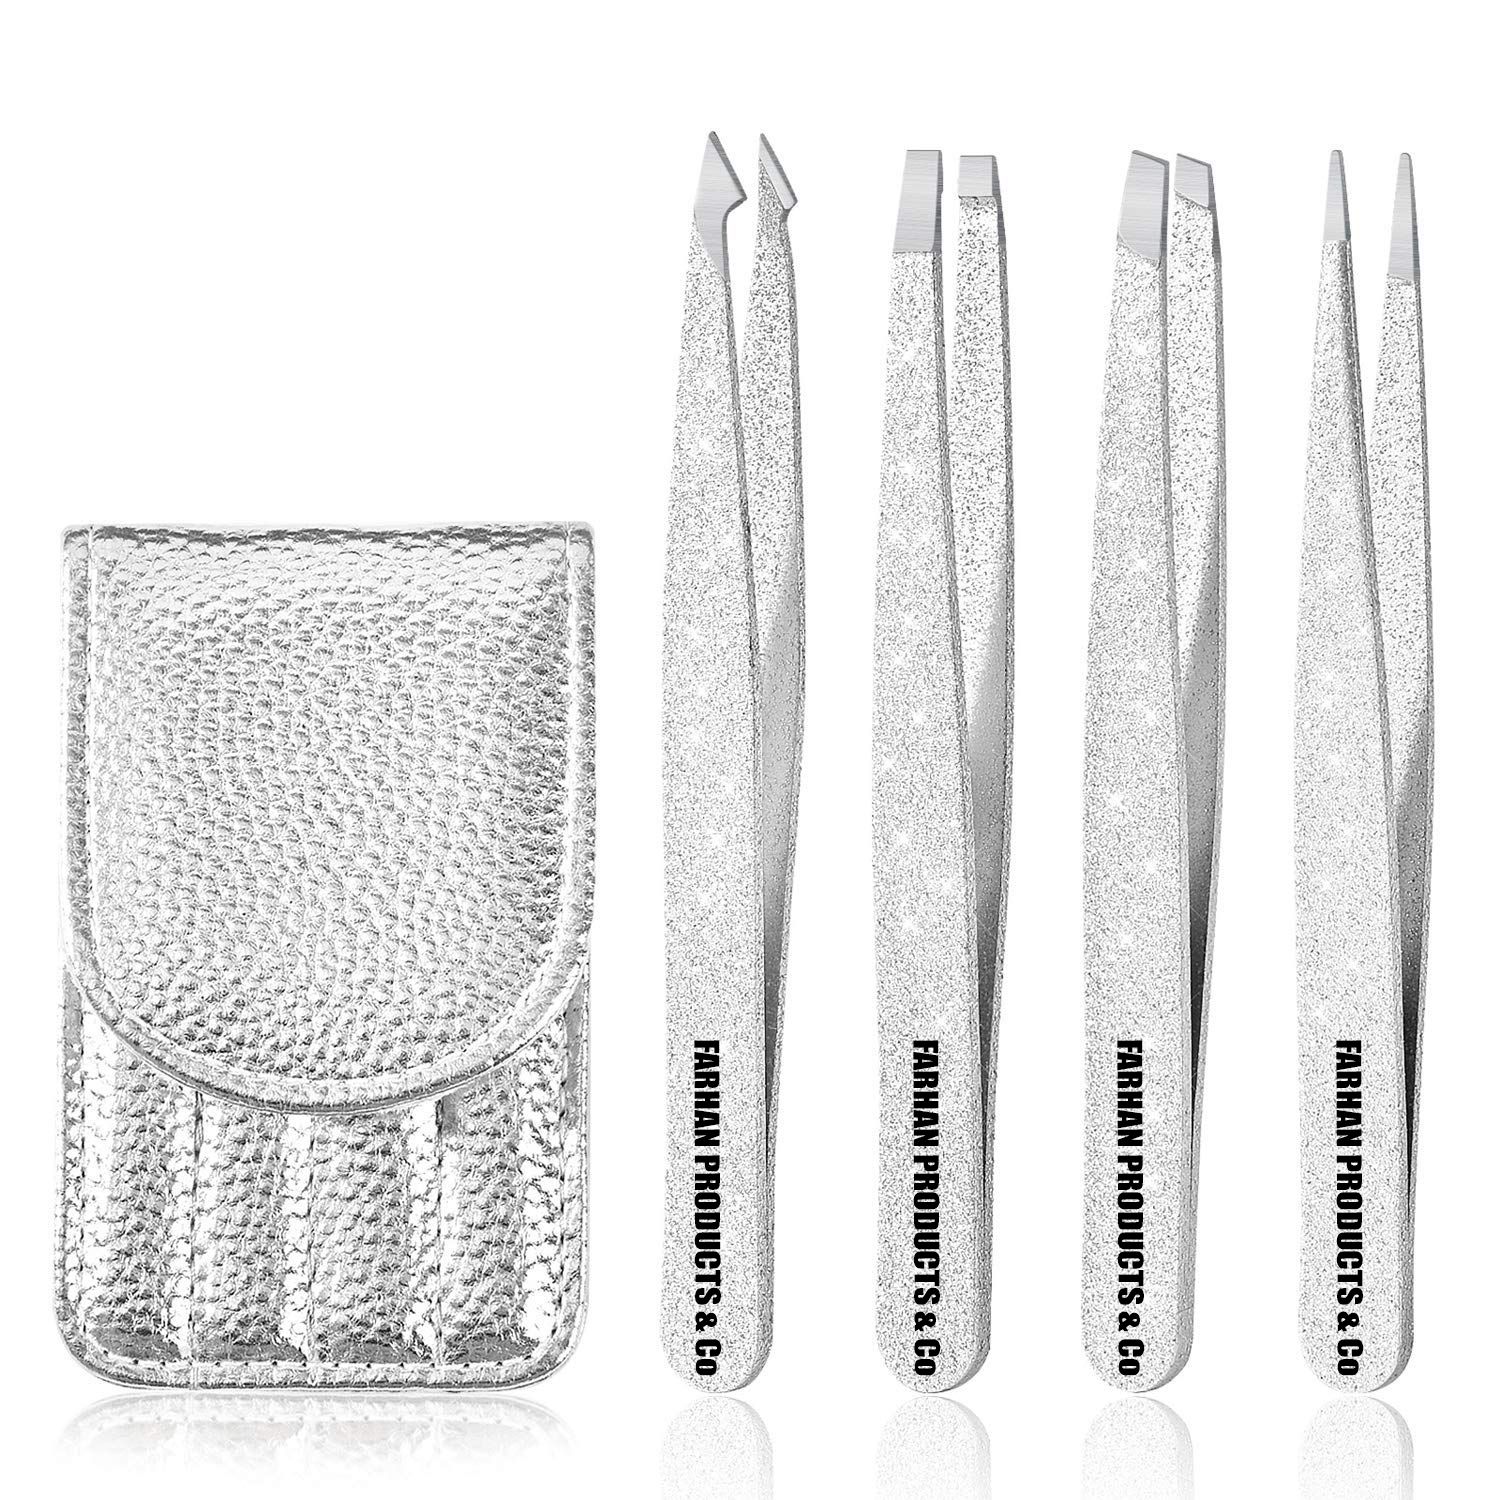 3PCS Professional Stainless Steel Slant Tip and Point Eyebrows Ingrown Hair Facial Hair Blackhead and Lash Extension (Sliver)